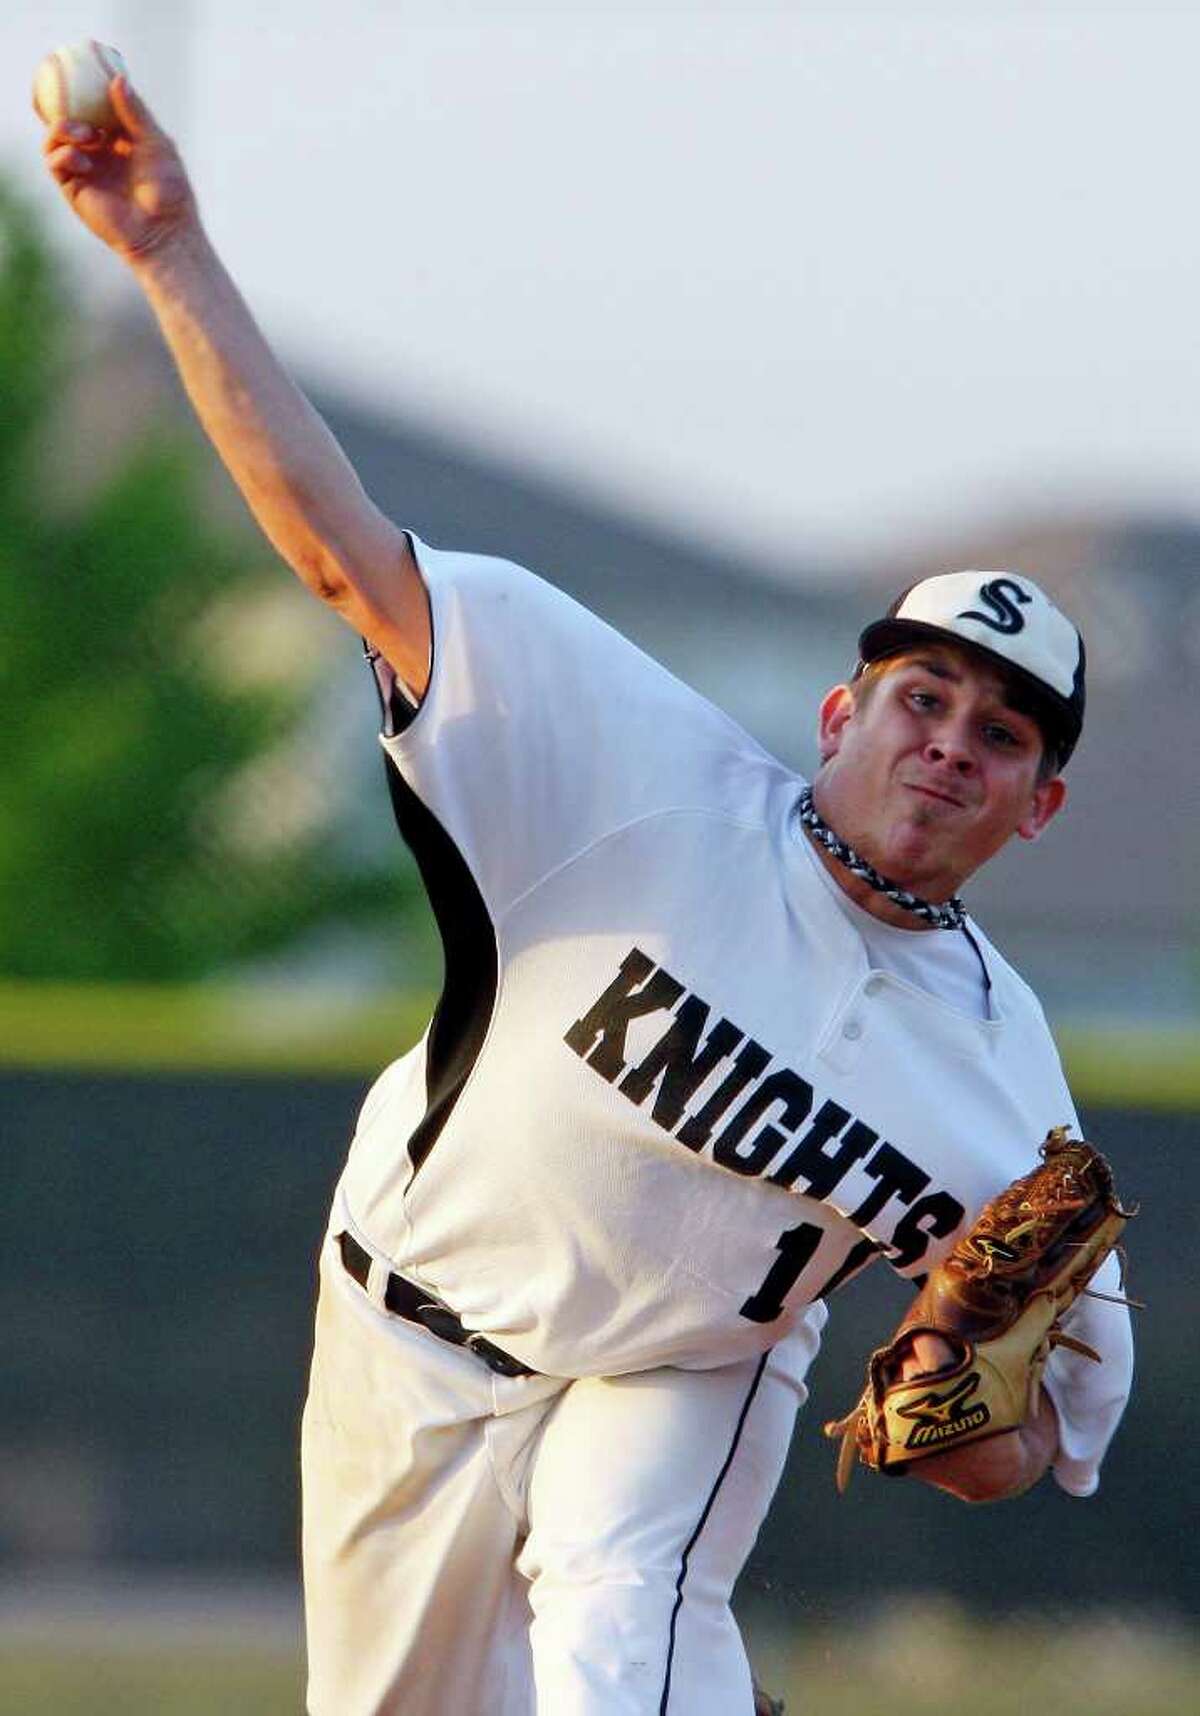 FOR SPORTS - Steele's Josh Potter pitches against New Braunfels Friday April 15, 2011 at Steele High School. (PHOTO BY EDWARD A. ORNELAS/eaornelas@express-news.net)